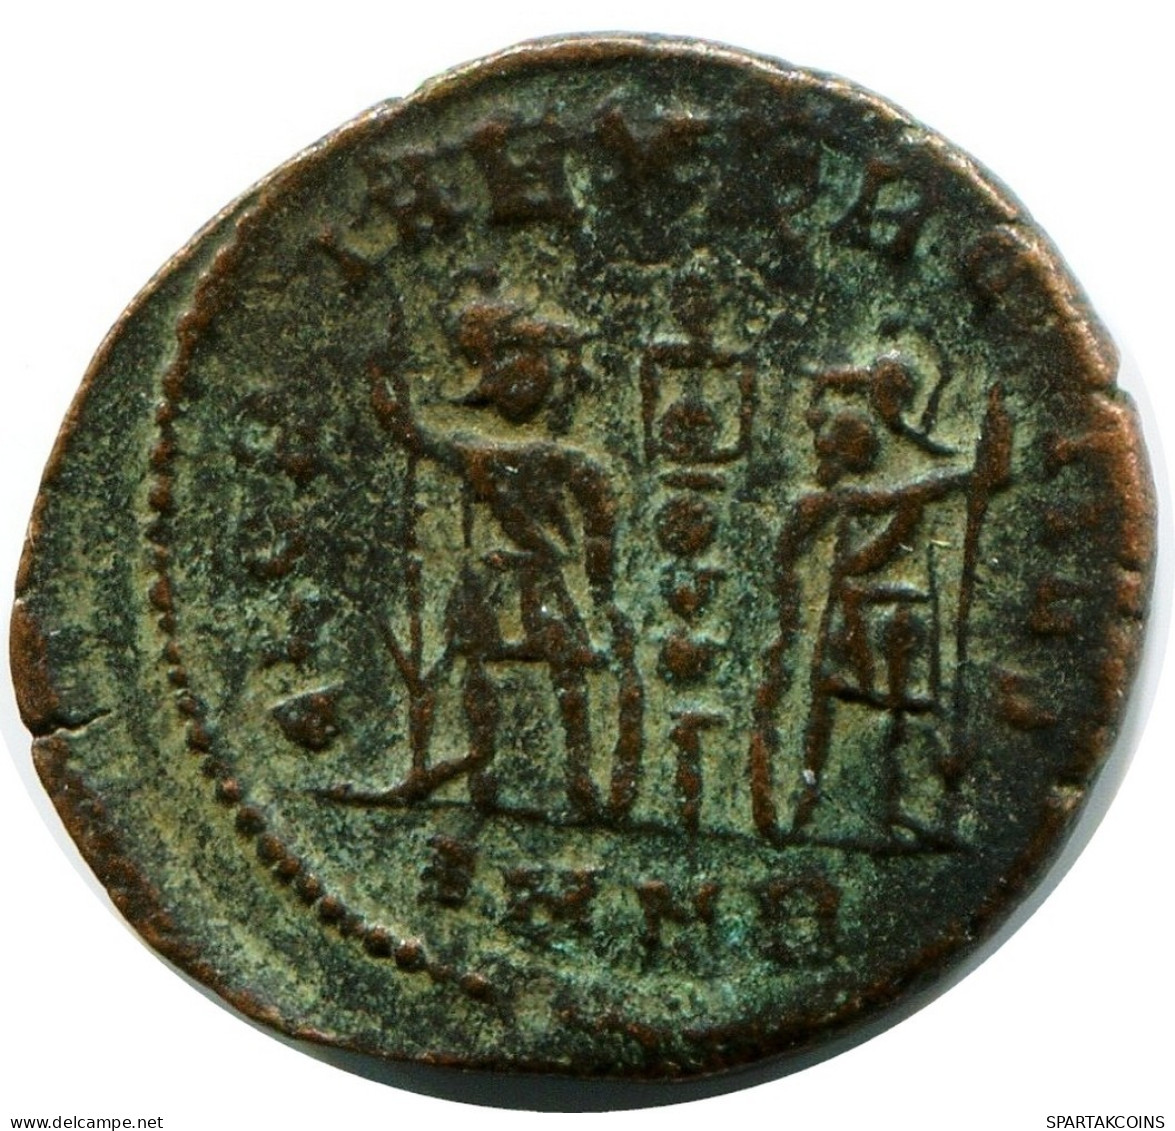 CONSTANS MINTED IN NICOMEDIA FROM THE ROYAL ONTARIO MUSEUM #ANC11721.14.E.A - El Impero Christiano (307 / 363)